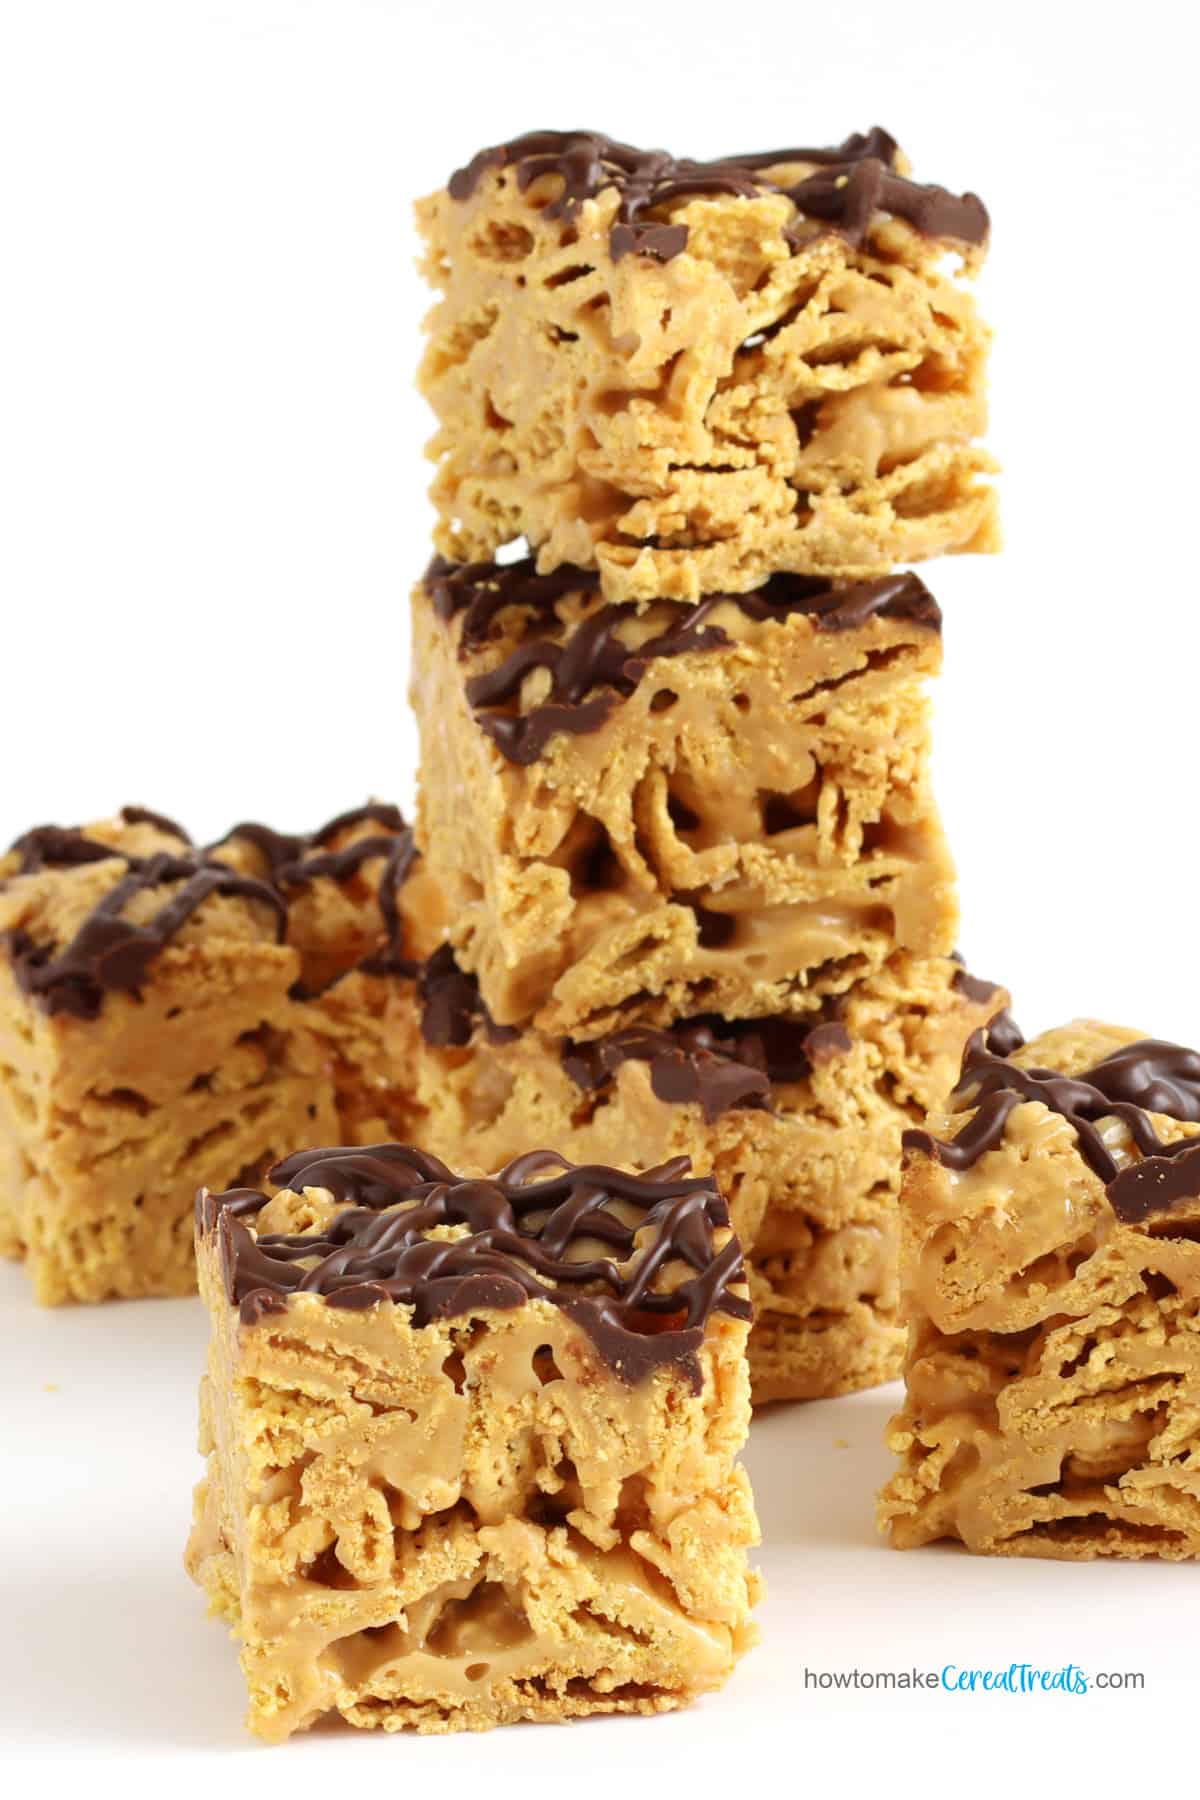 peanut butter cereal bars drizzled with chocolate are stacked on top of each other